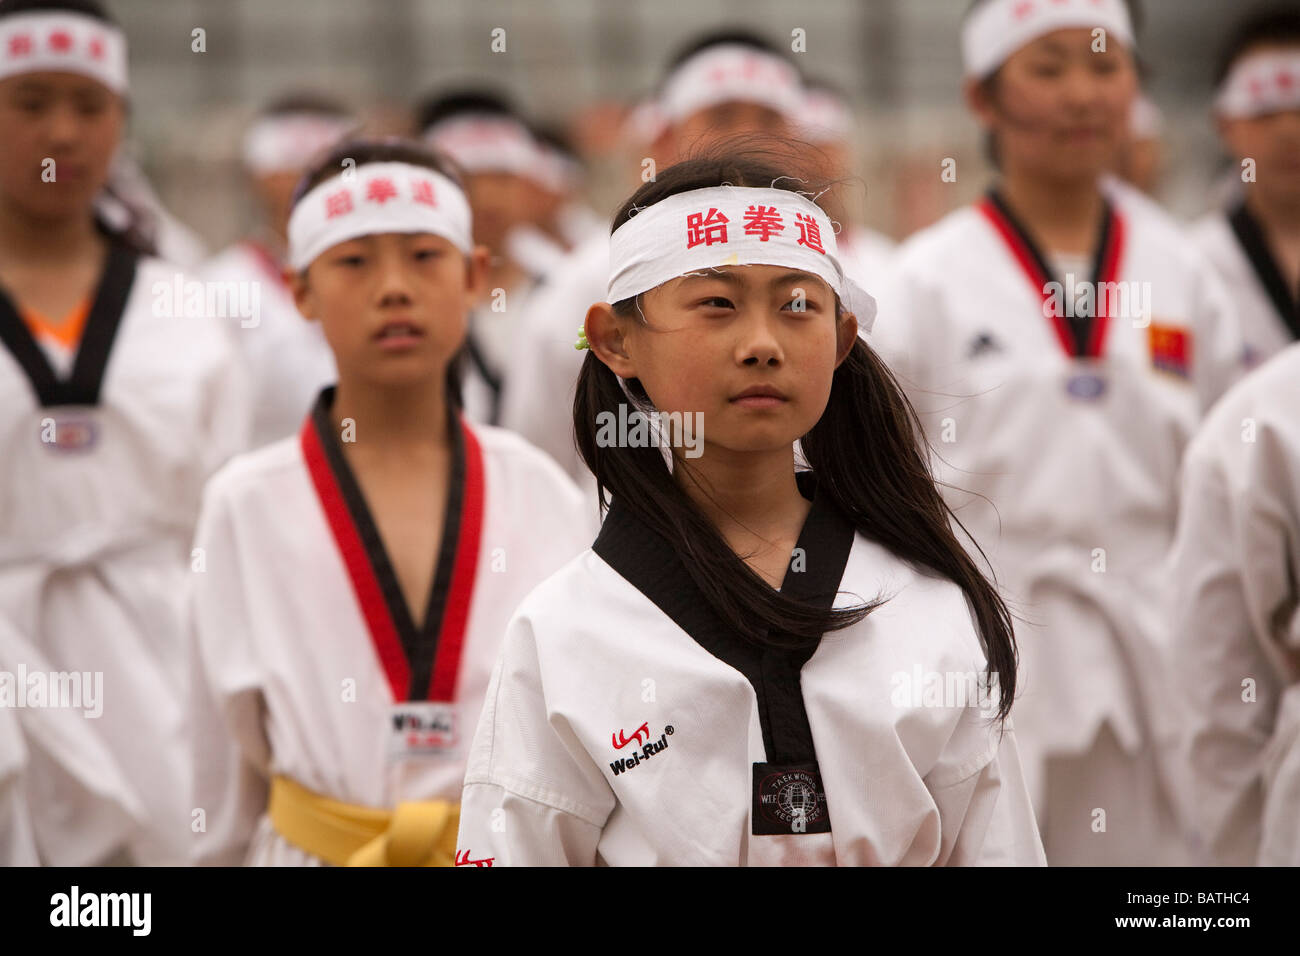 School children  at the city sports stadium  to rehearse for a parade in front of Party Leaders, Changchun,  Jilin Province, China Stock Photo